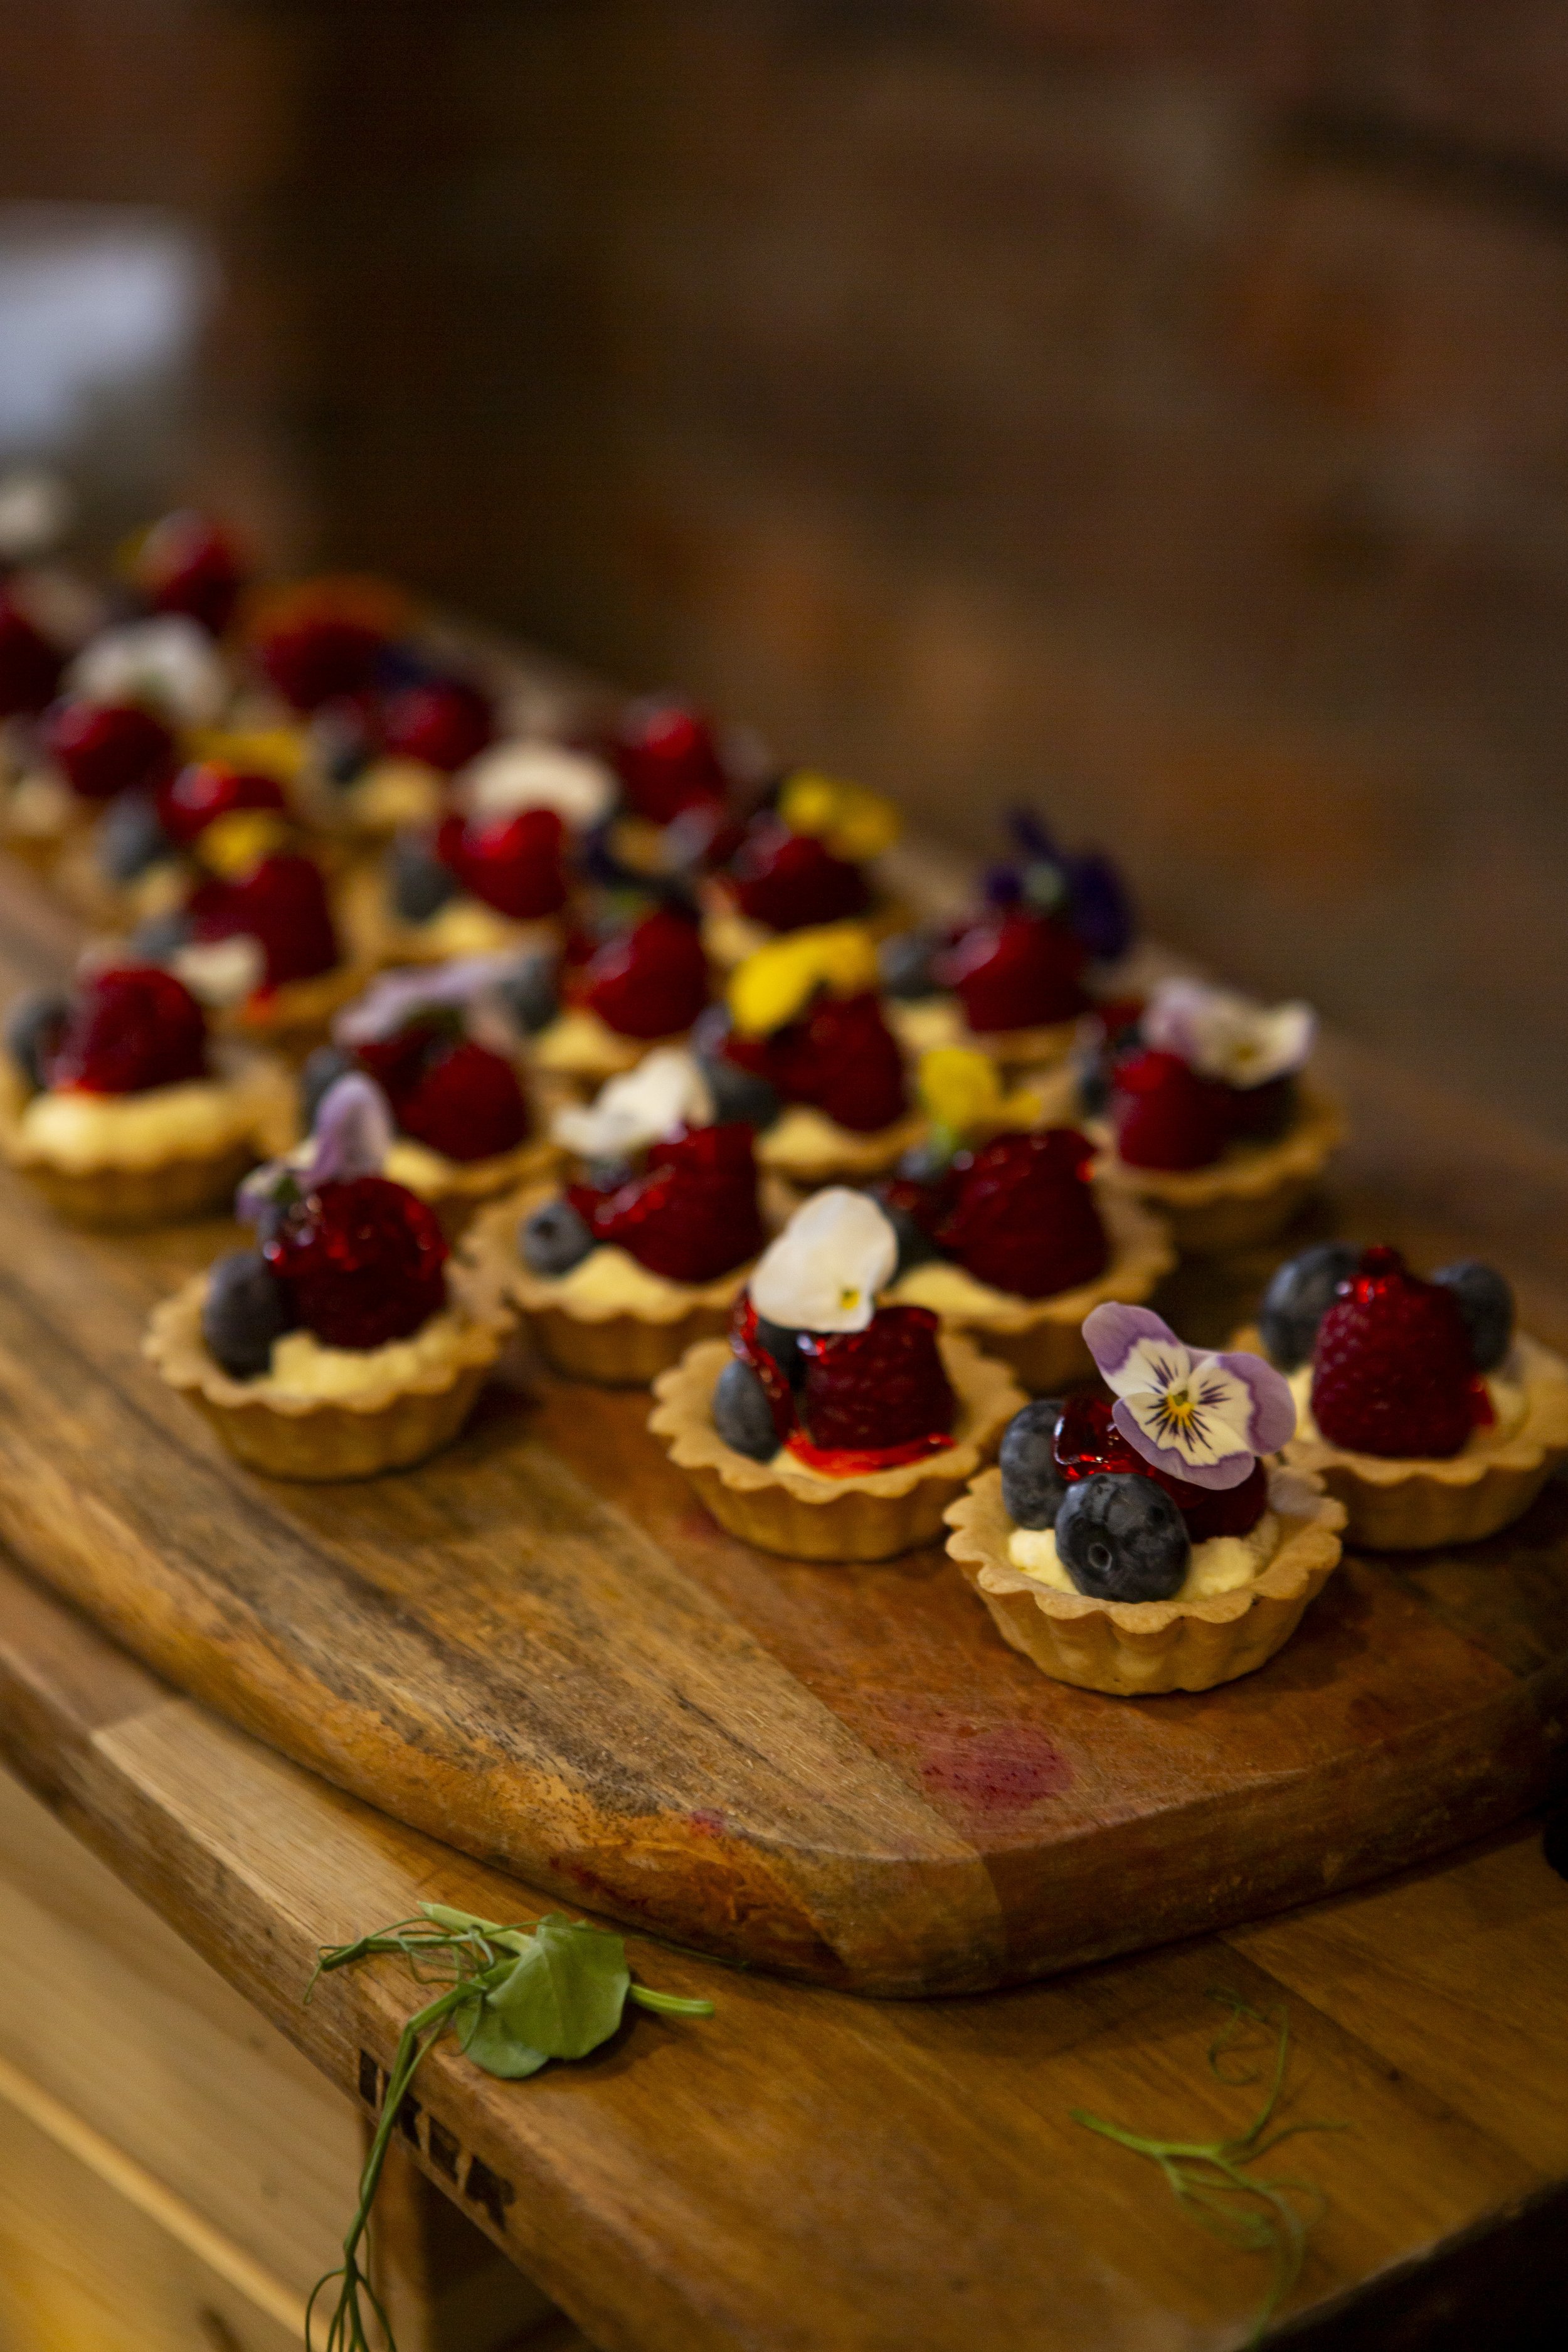  An up-close image of tasty desserts on display at The Un-Wedding Show Scotland. 